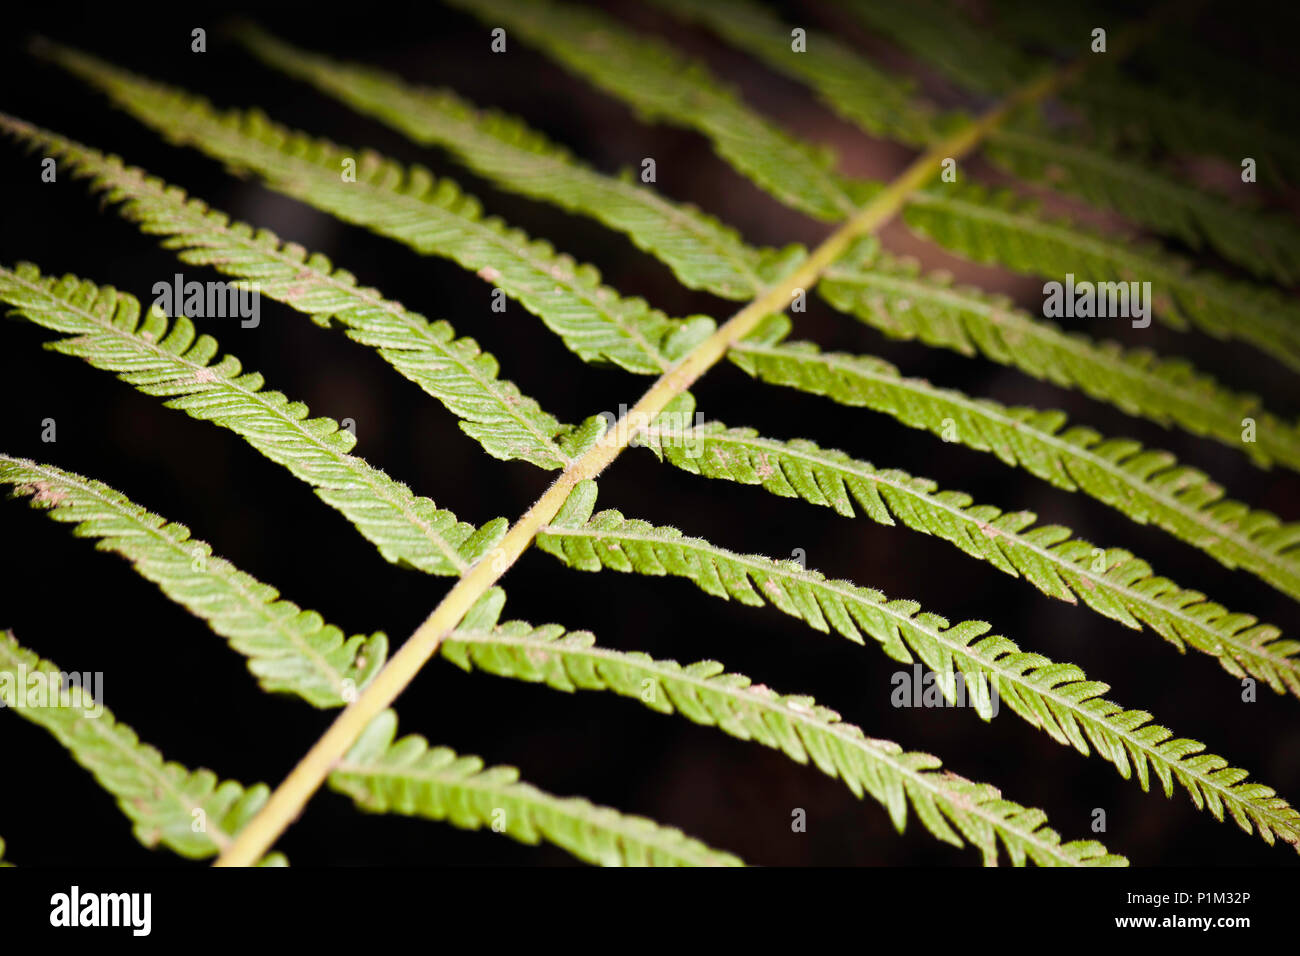 Fern Leaf Branch Abstract In A Forest Stock Photo